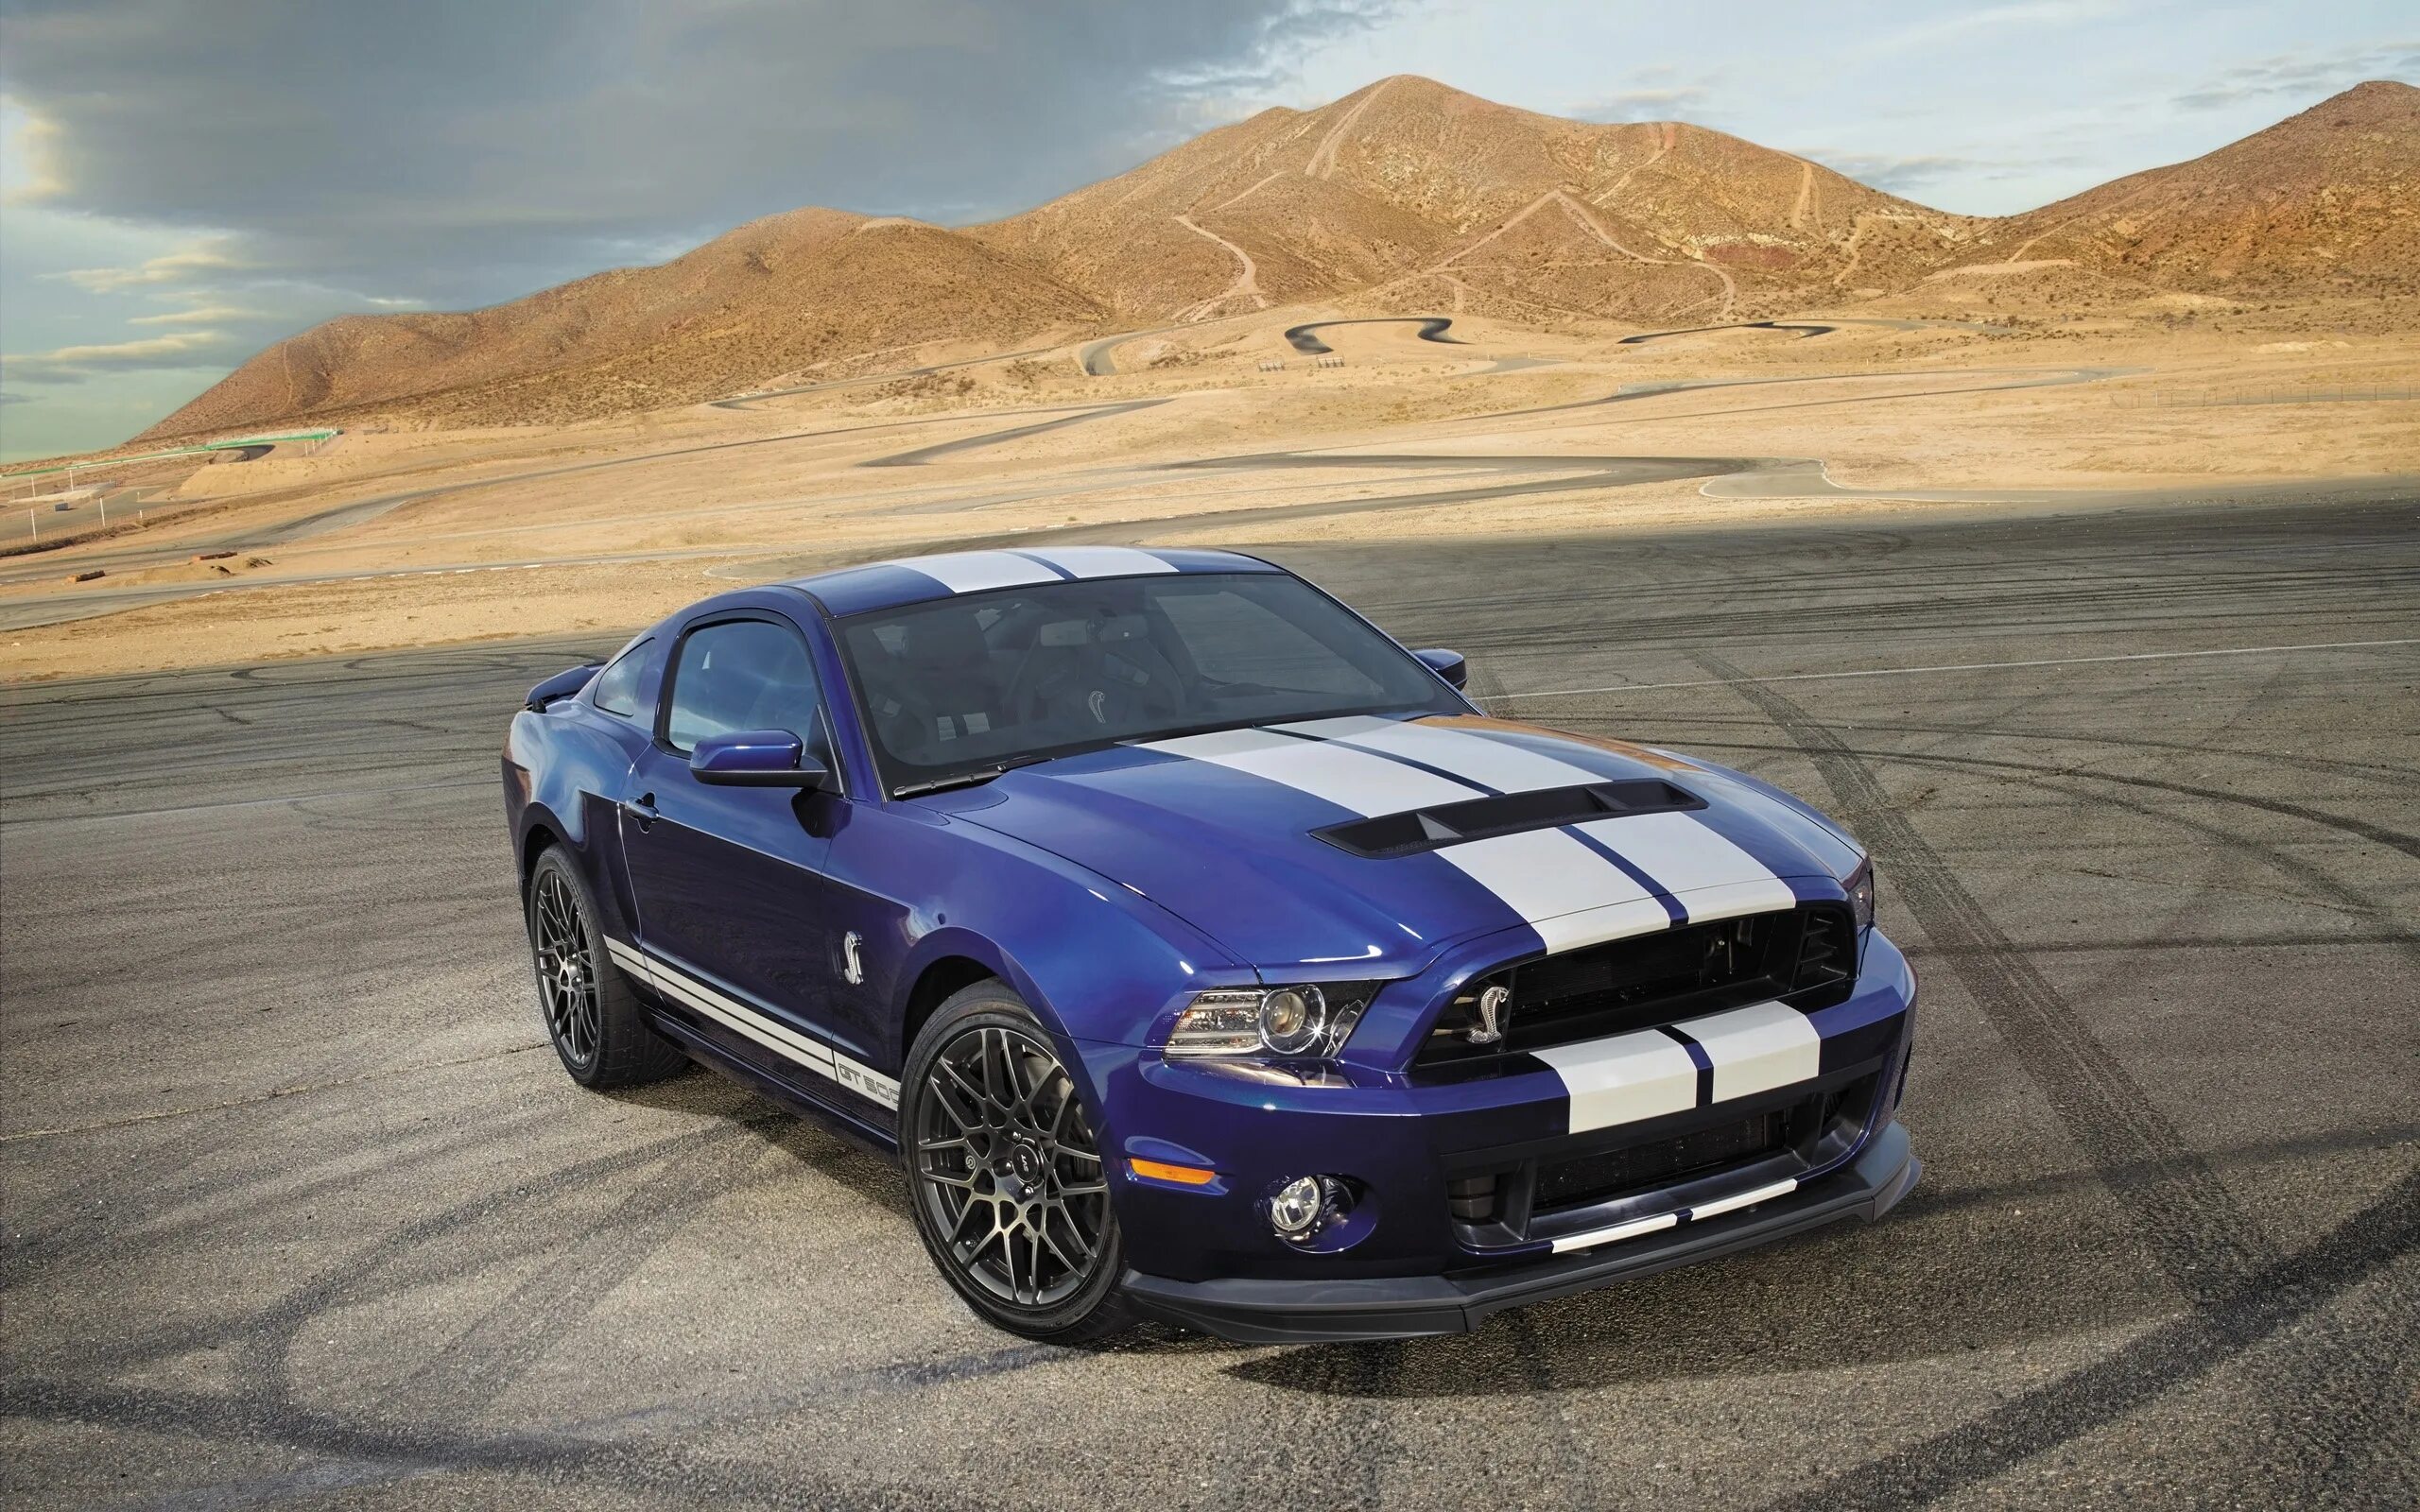 Форд Мустанг gt 500. Форд Шелби ГТ 500. Ford Shelby gt500. Ford Mustang gt.